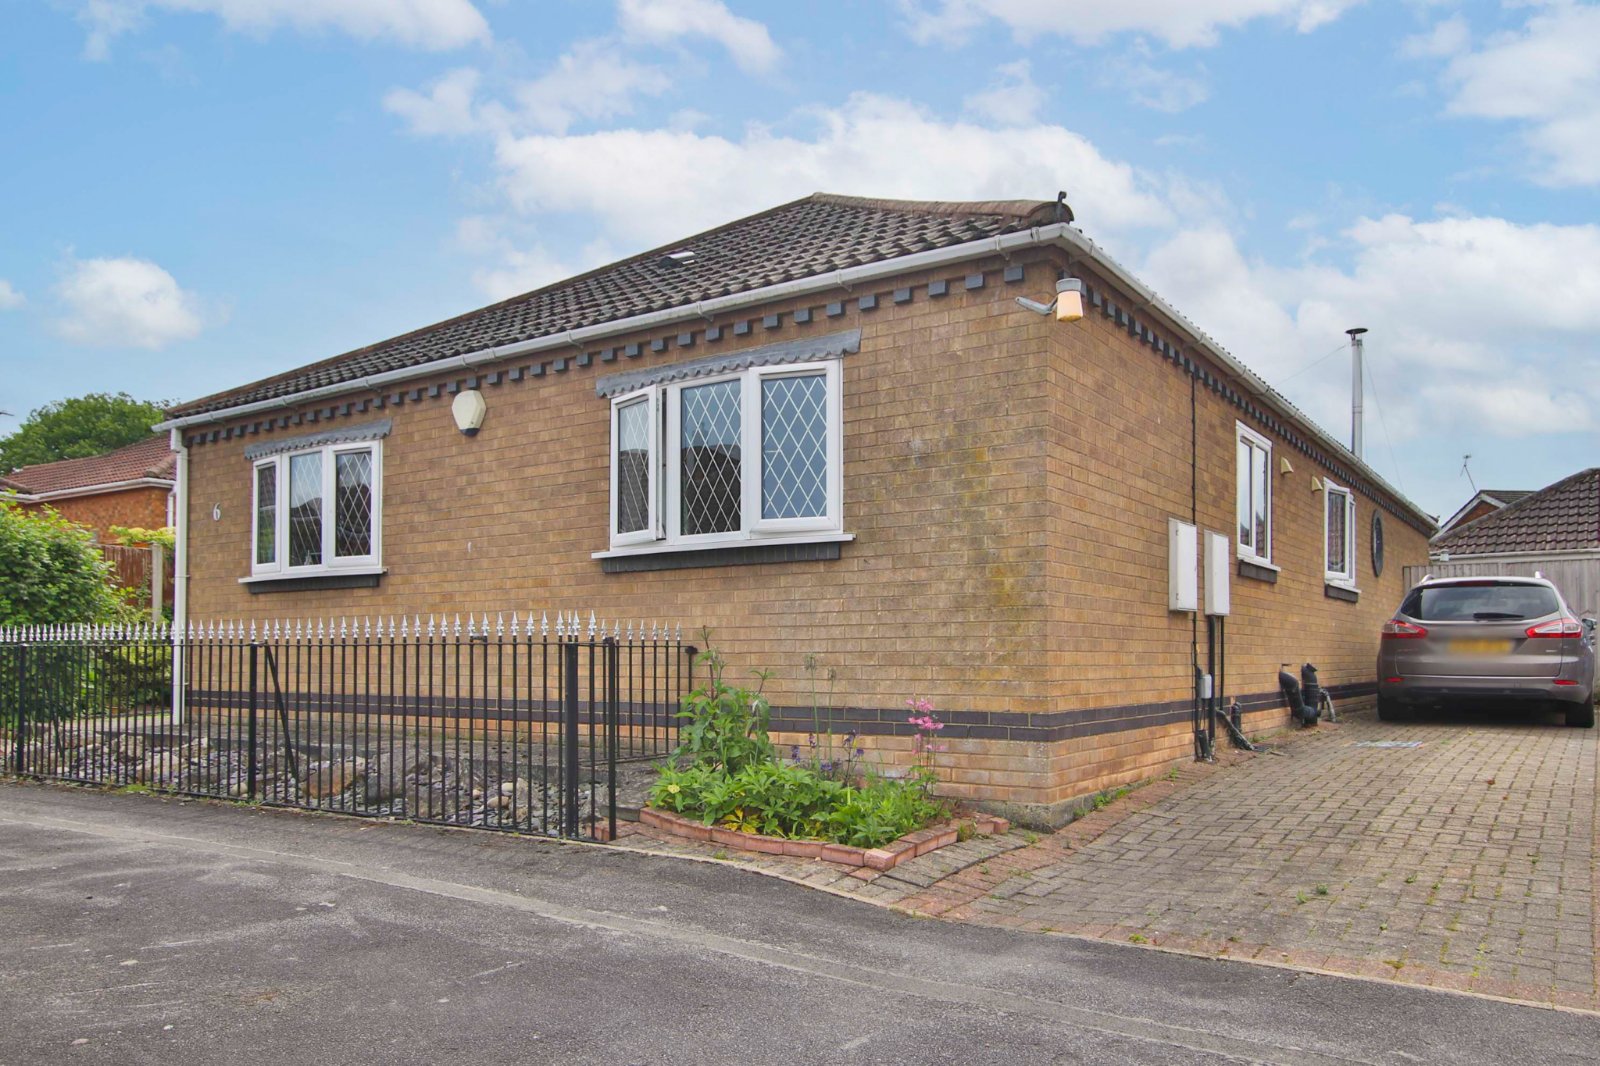 3 bed bungalow for sale in Nicolson Drive, Barton-upon-Humber, DN18